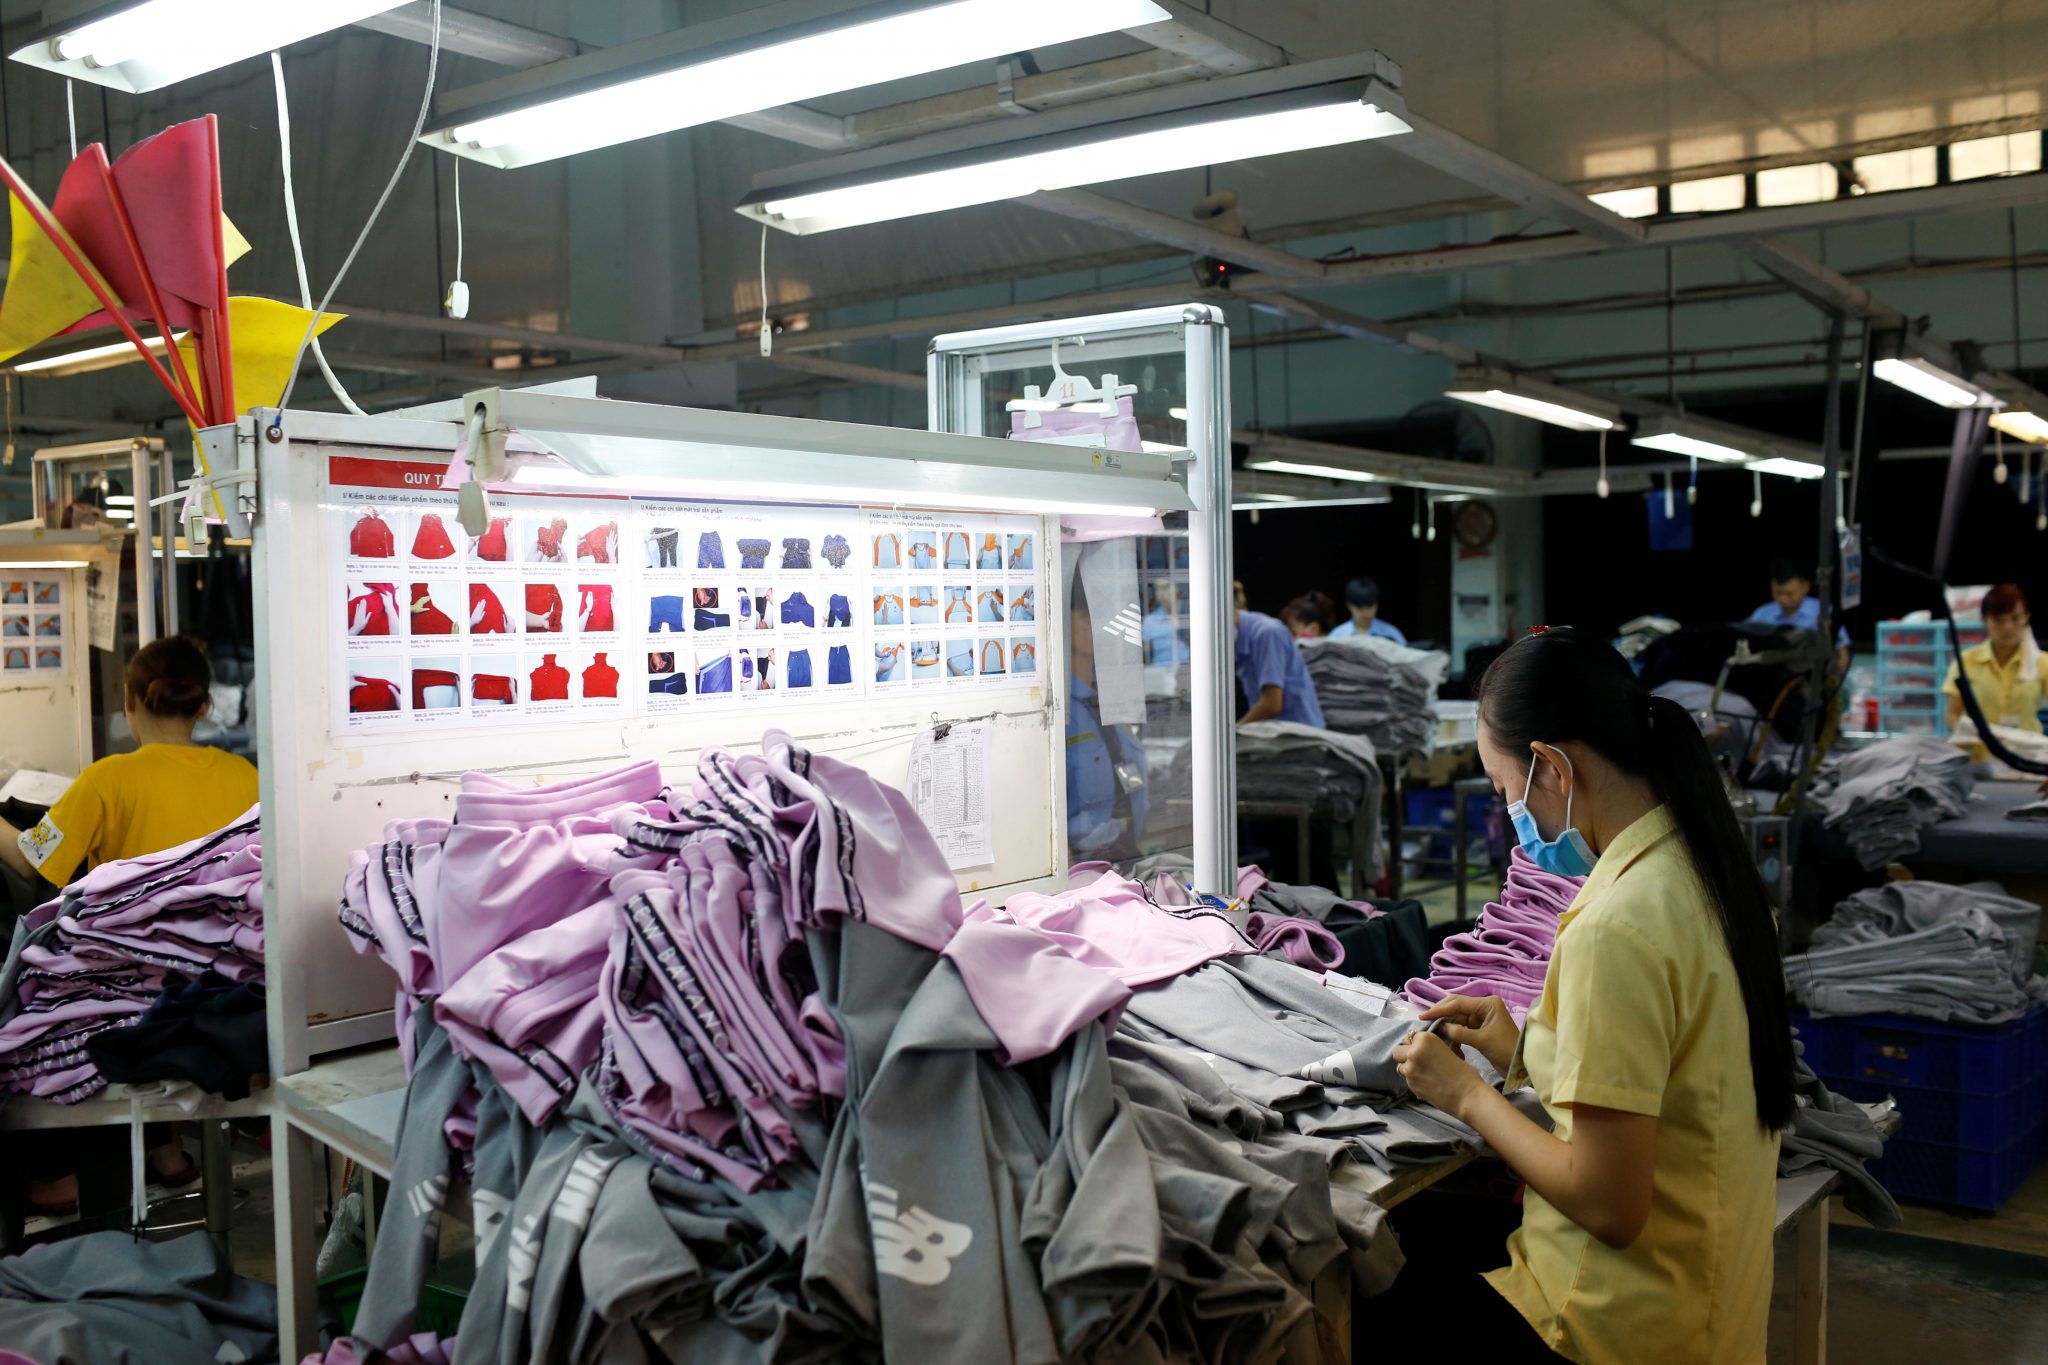 Vietnam's textile and garment industry hit hard by COVID-19